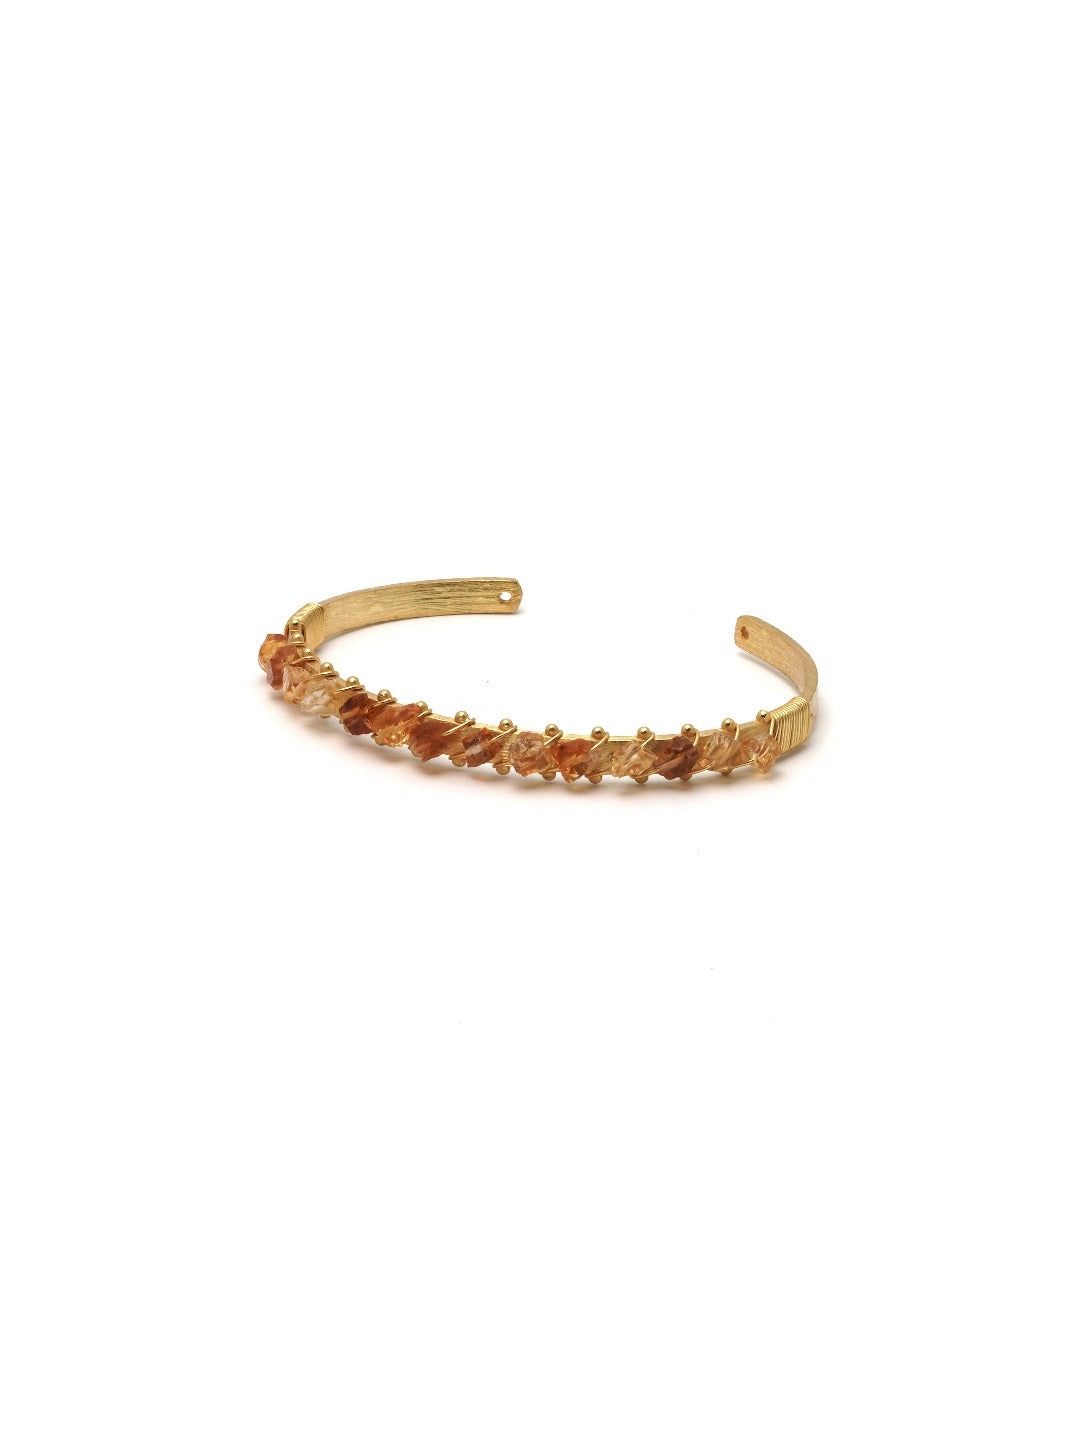 Gold Plated Gemstone Handcuff - QUEENS JEWELS